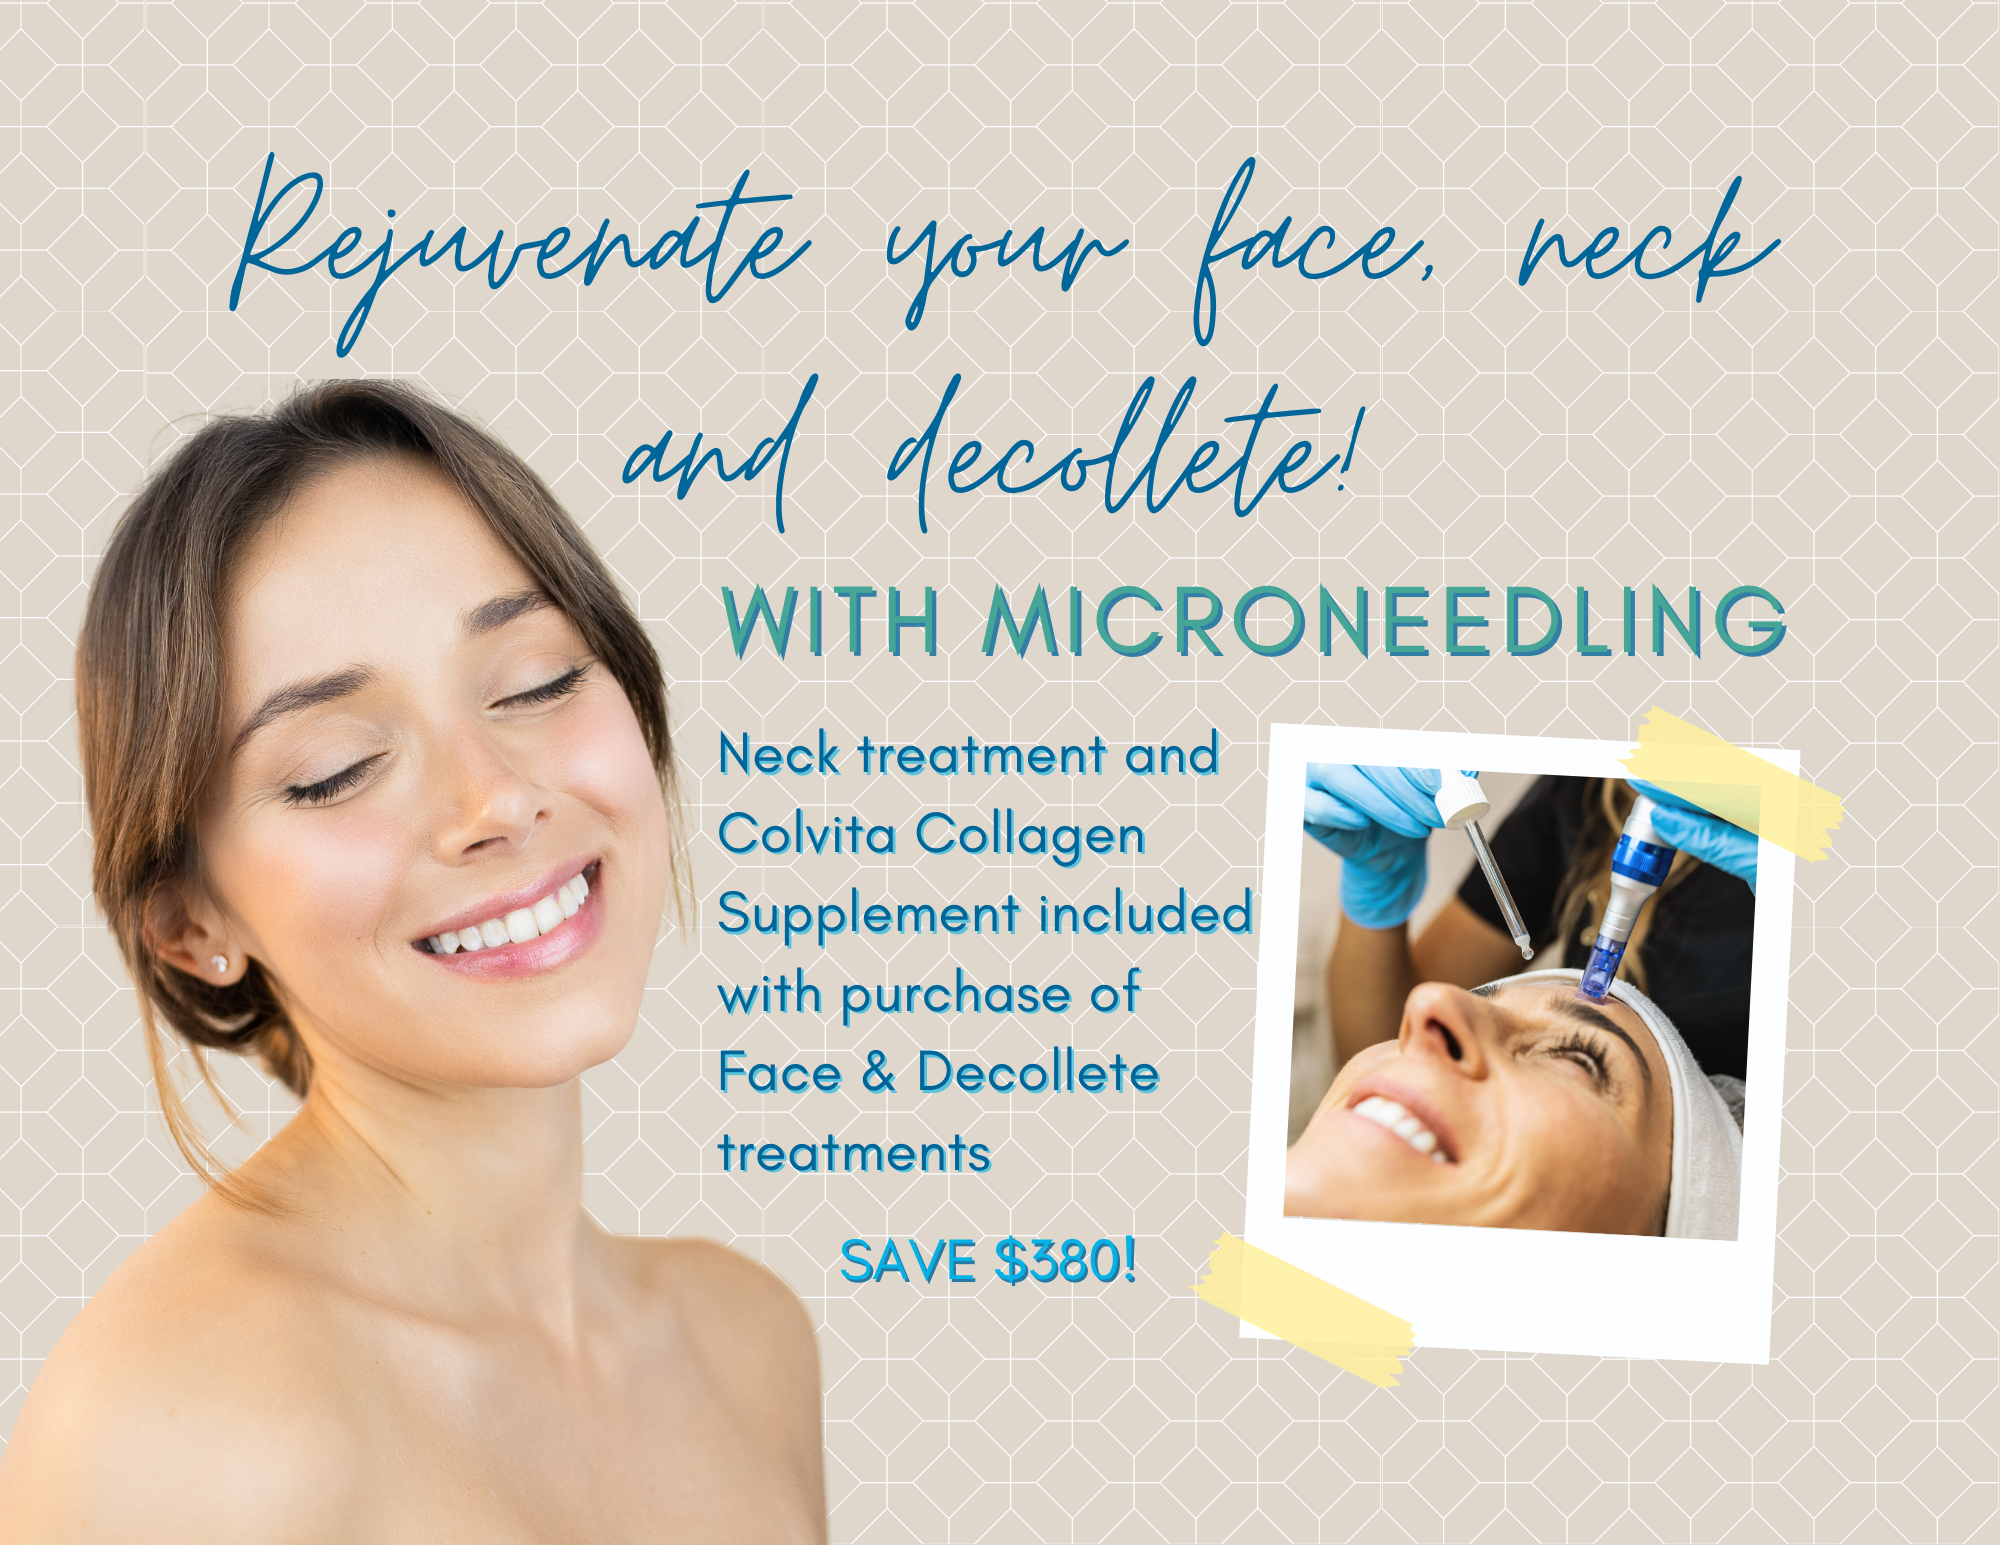 Rejuvenate your face, neck and decollete with microneedling. Neck treatment and Colvita Collagen Supplement included with purchase of Face & Decollete treatments - Save $380!